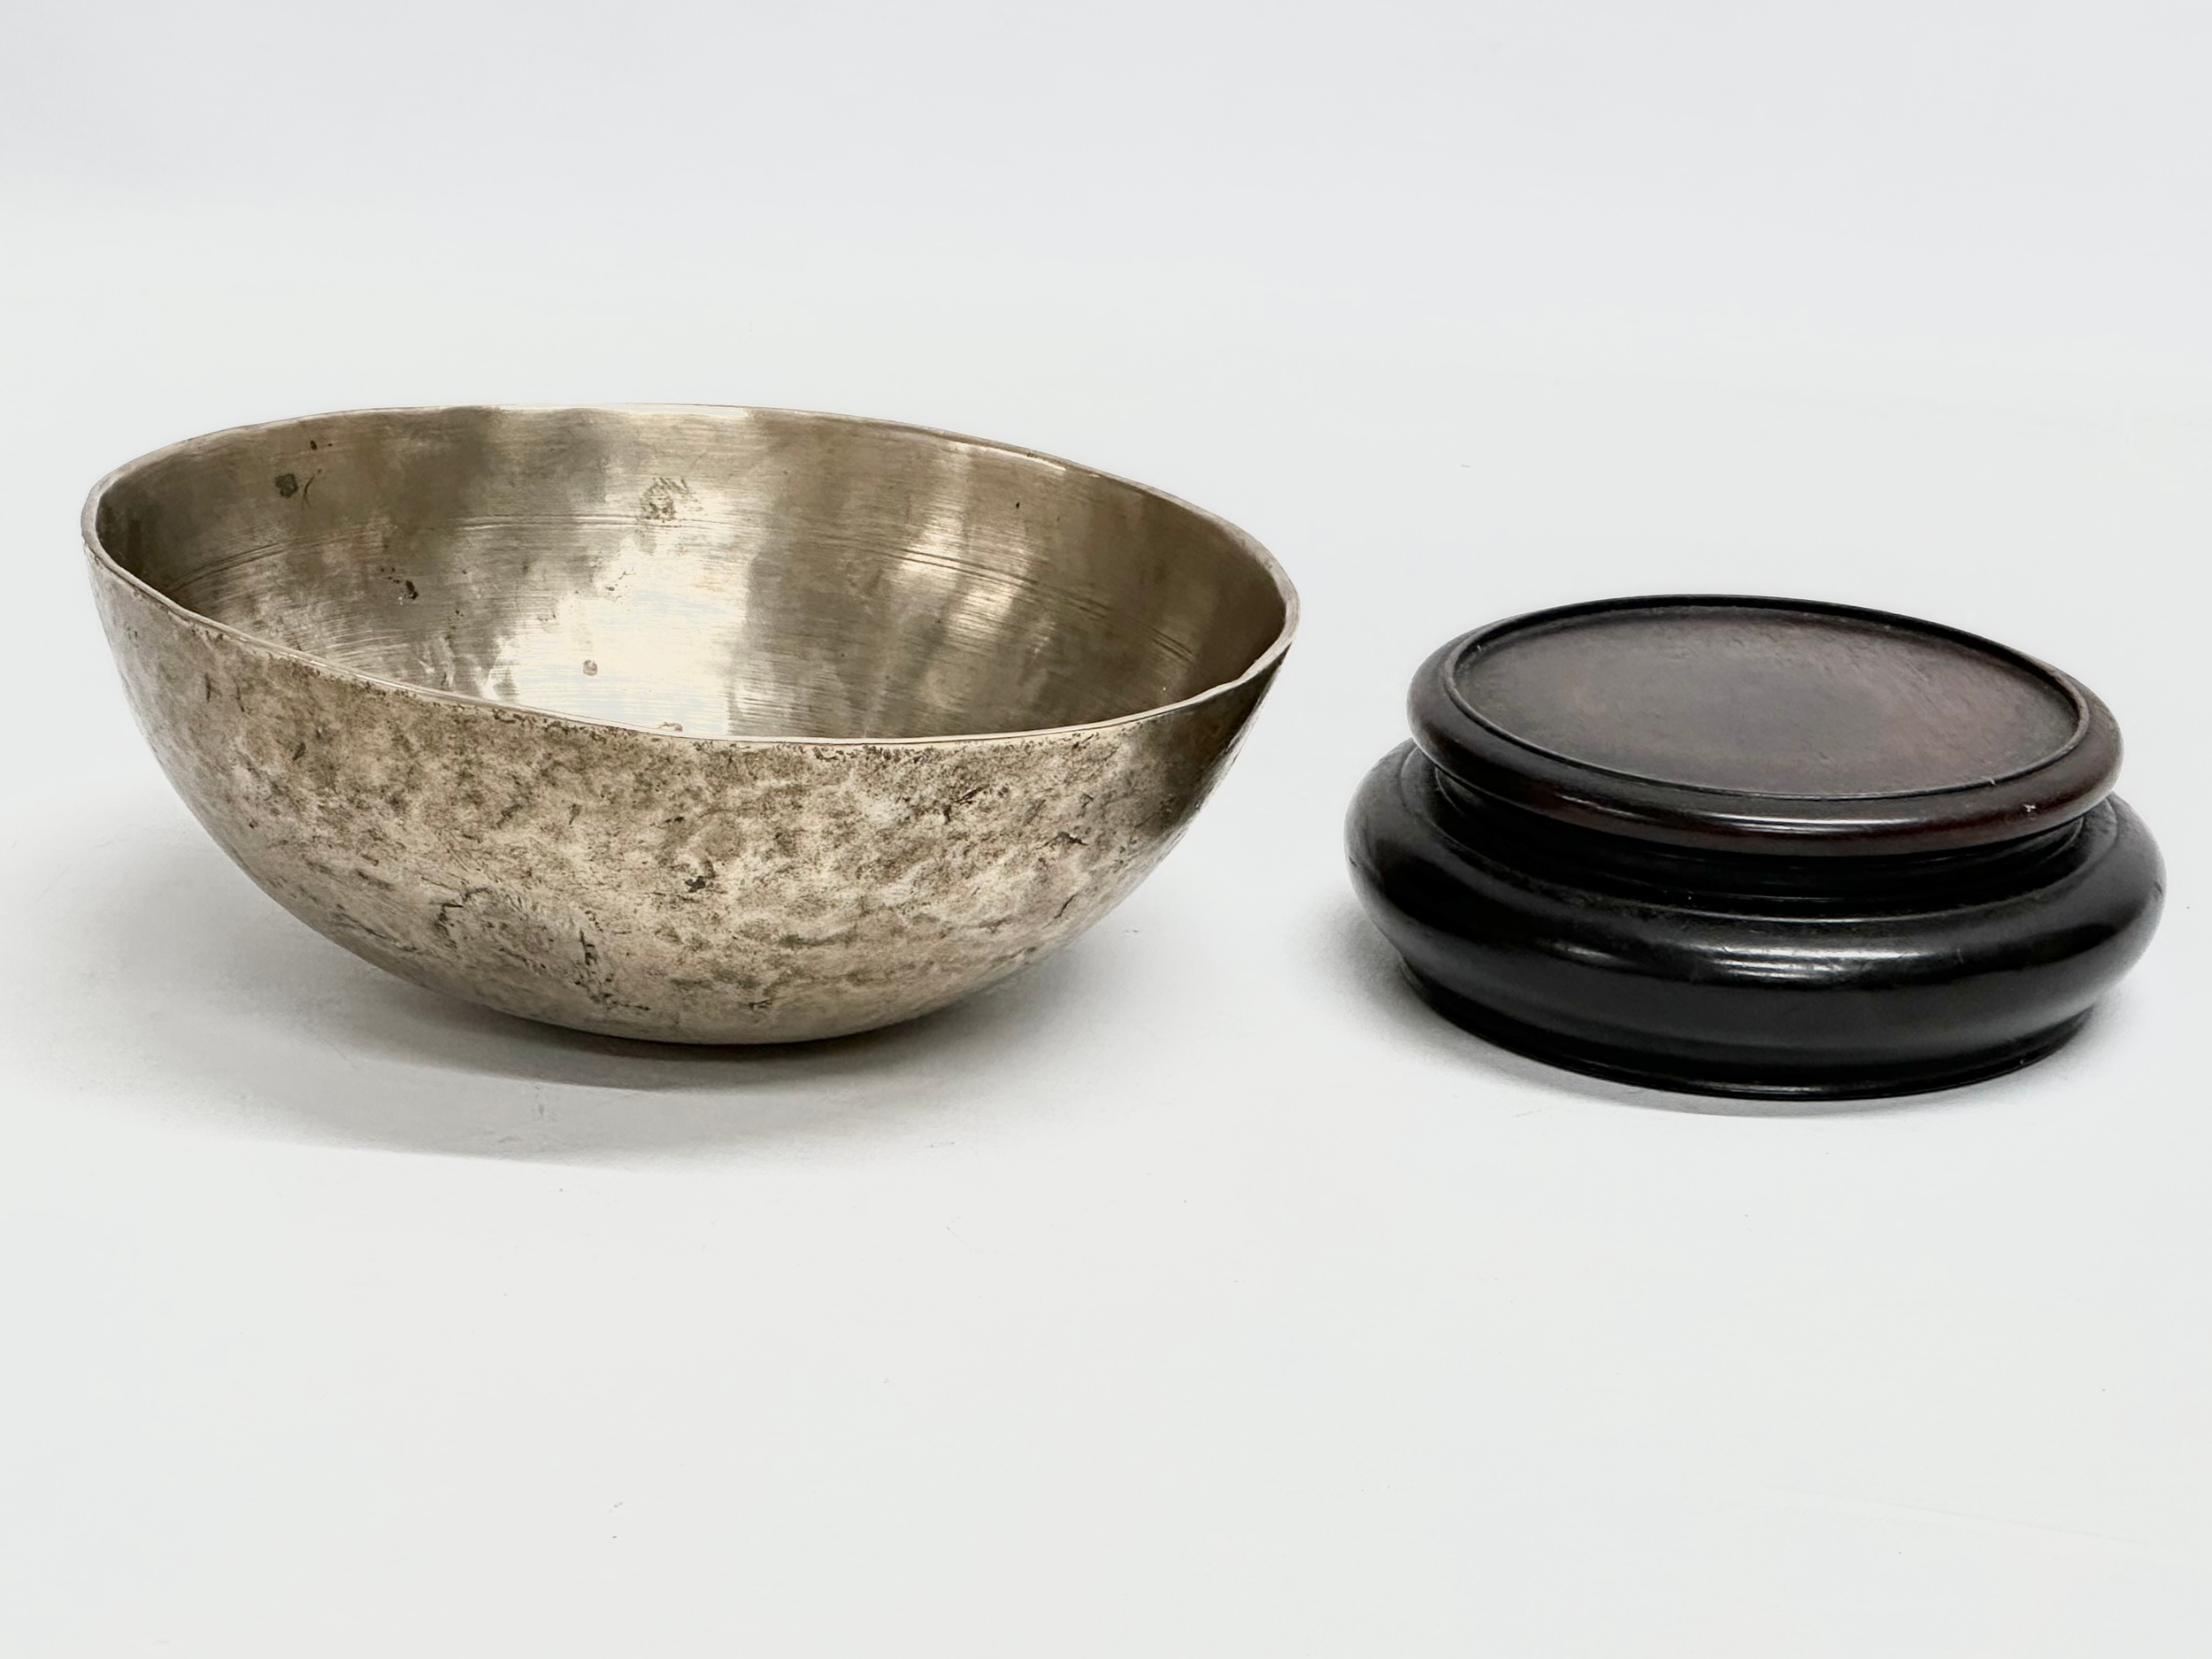 A Late 19th Century Tibetan Singing bowl on stand. Bowl measures 16x6cm - Image 3 of 5